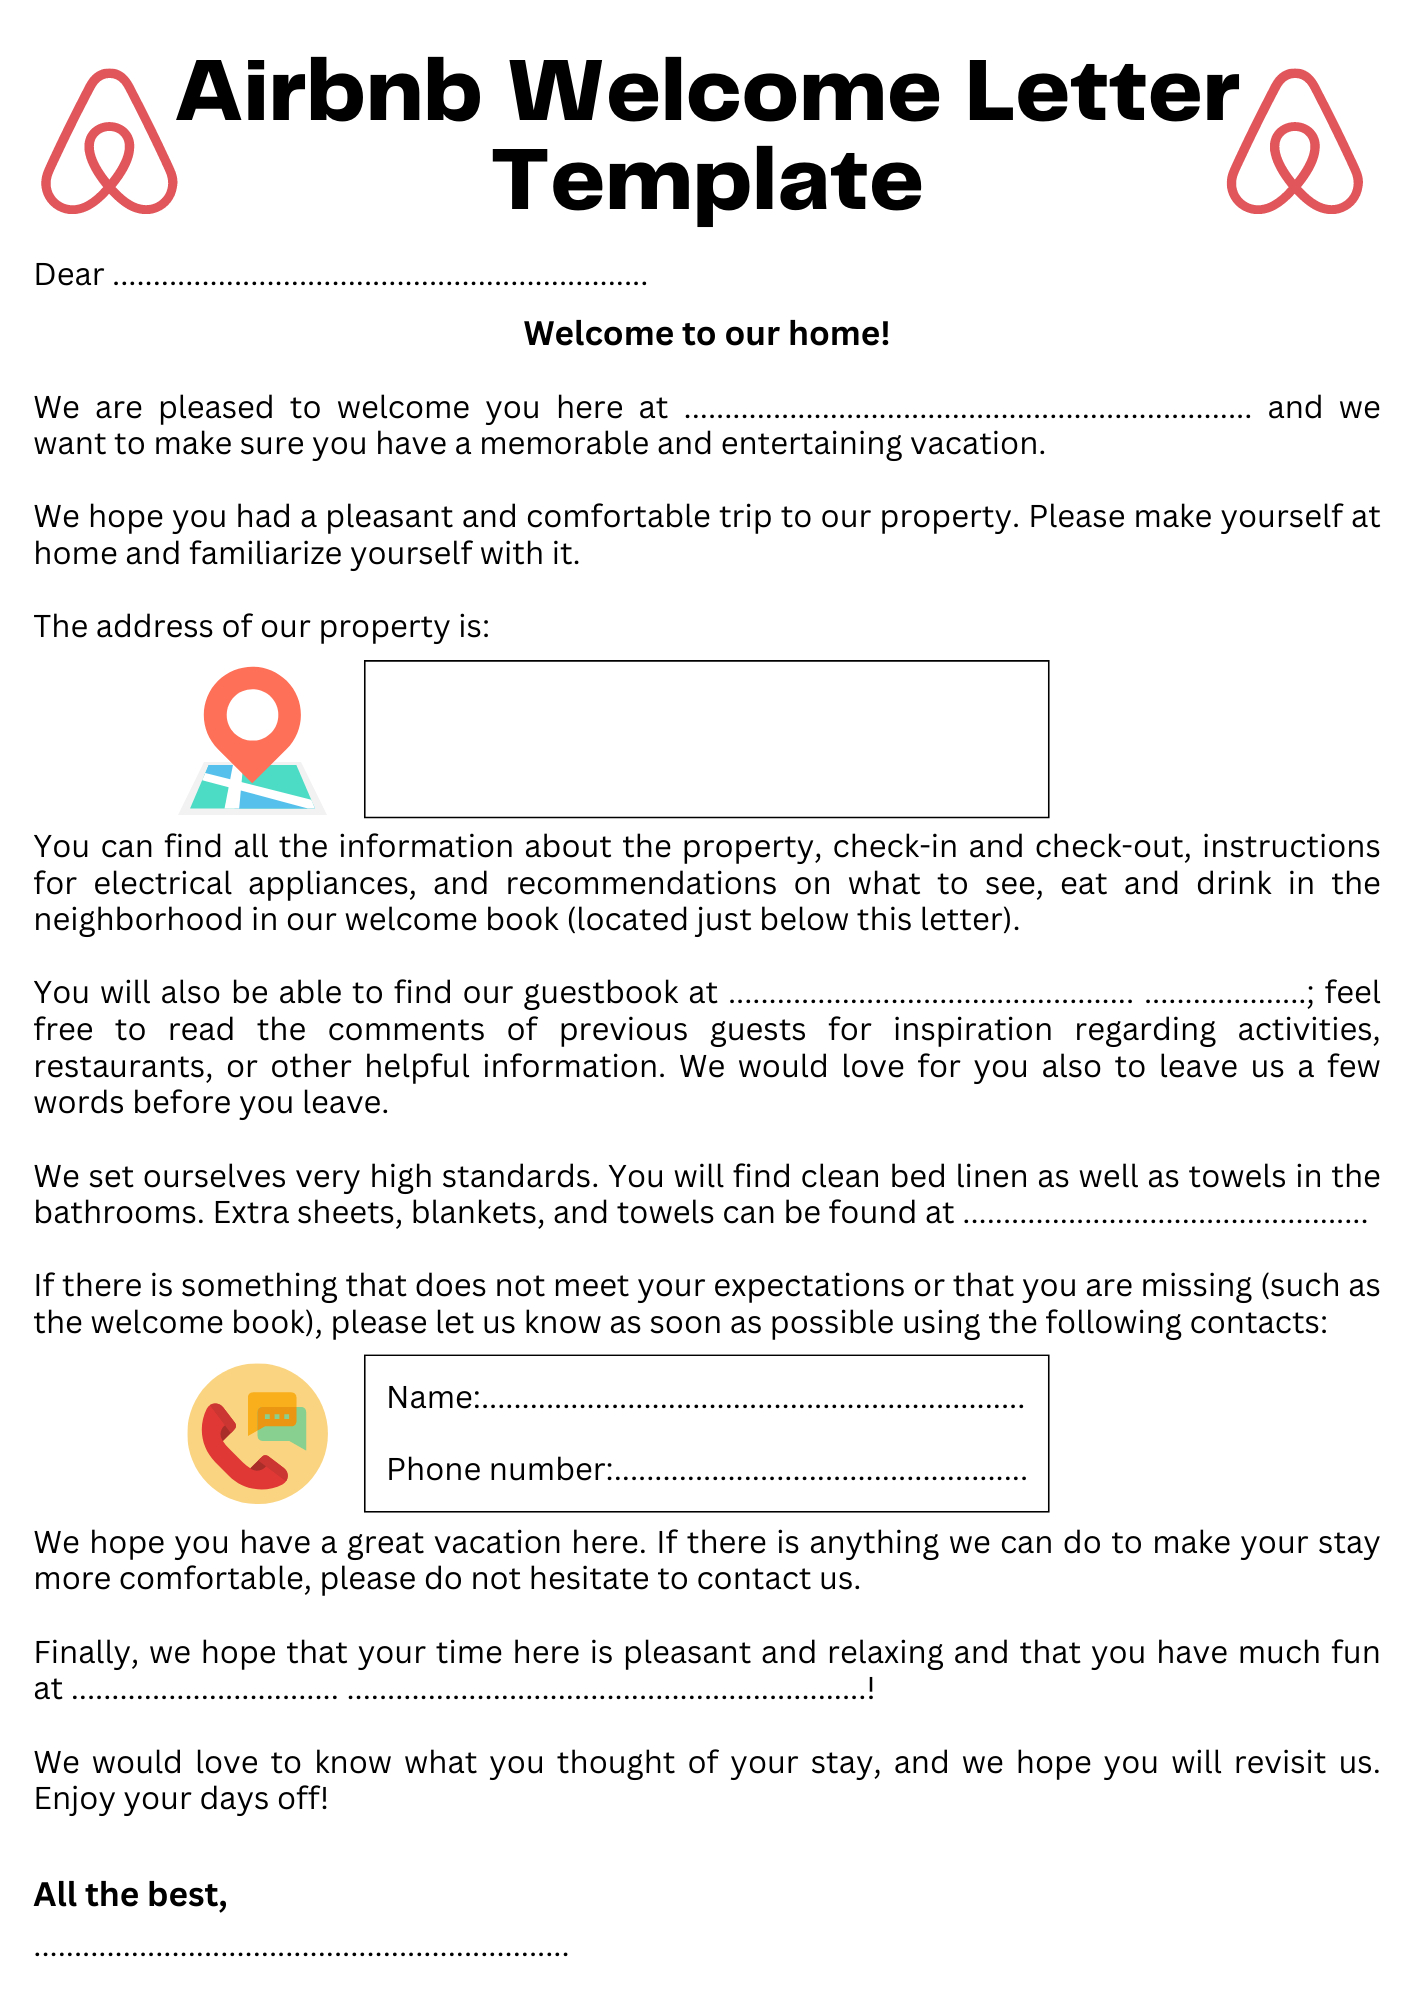 Airbnb welcome letter free template